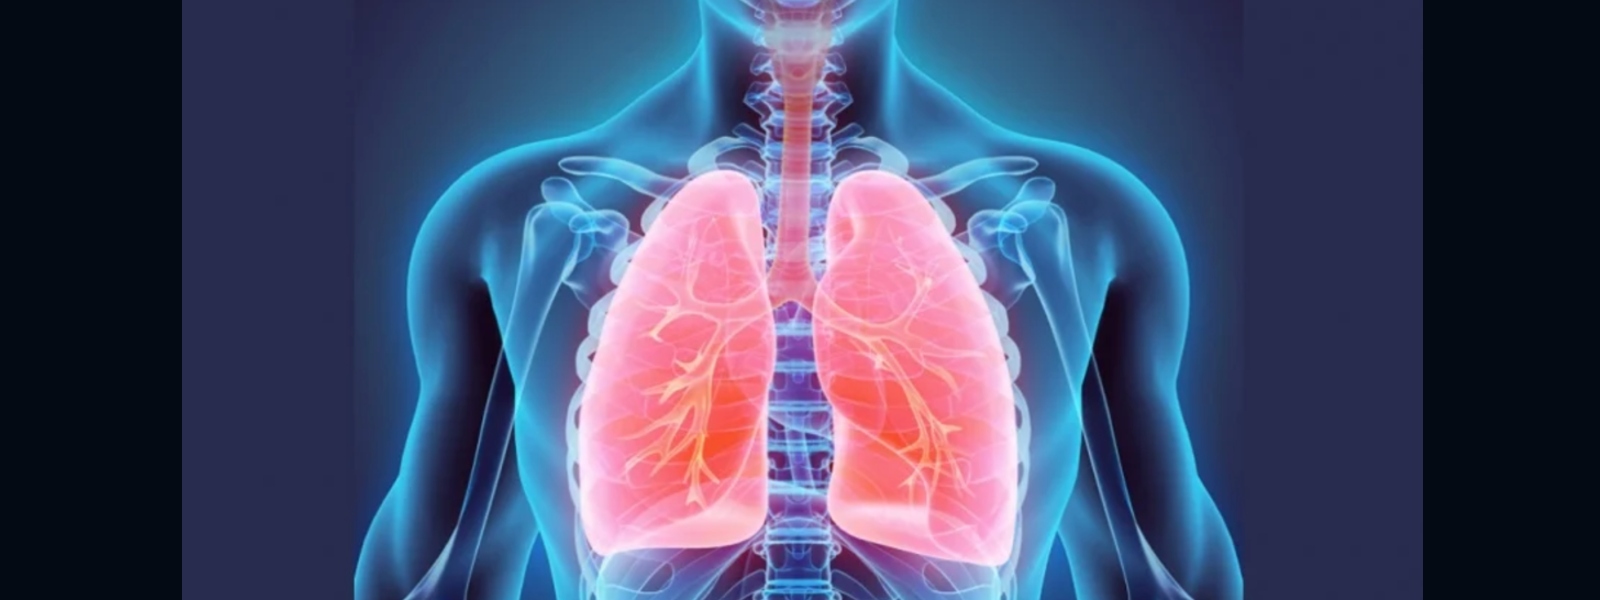 OVER 40% TB CASES IN WP, COLOMBO RECORDS 23%